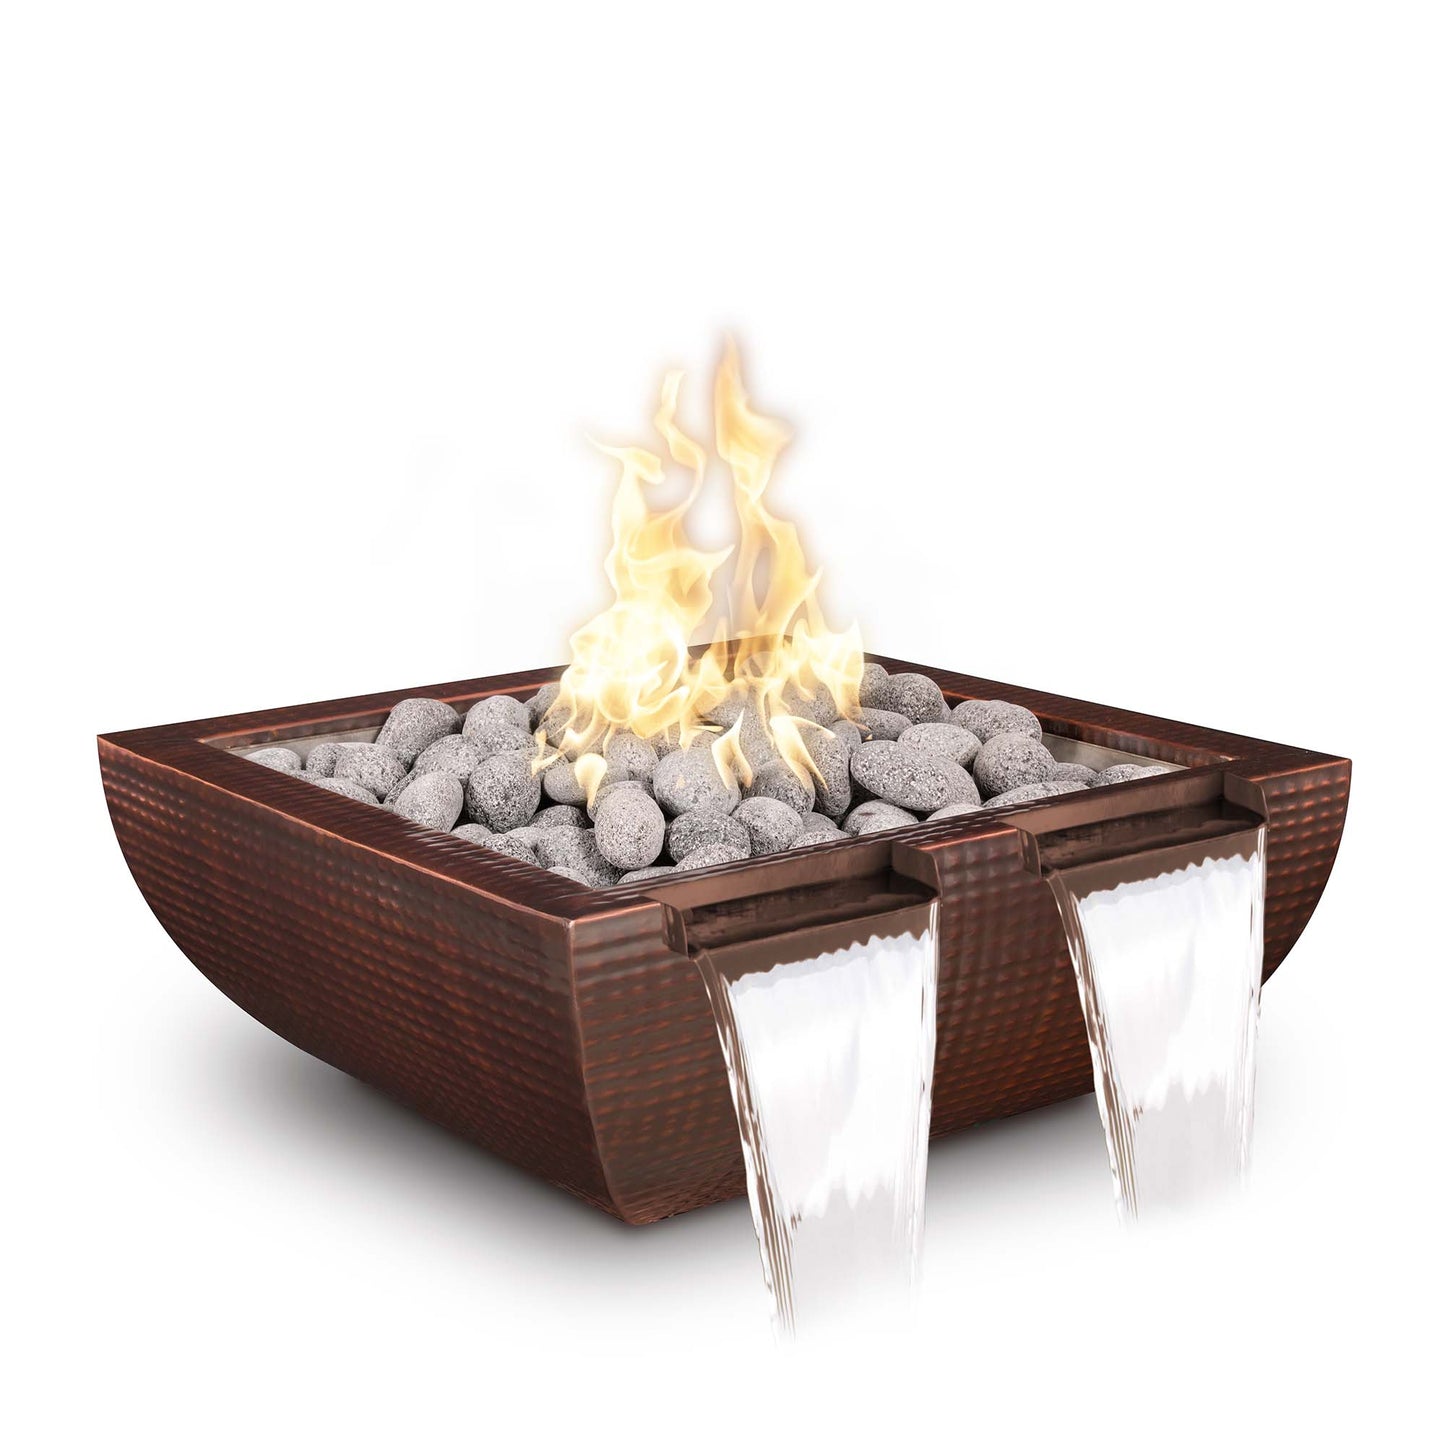 The Outdoor Plus Avalon Twin Spill 36" White Powder Coated Metal Liquid Propane Fire & Water Bowl with 12V Electronic Ignition